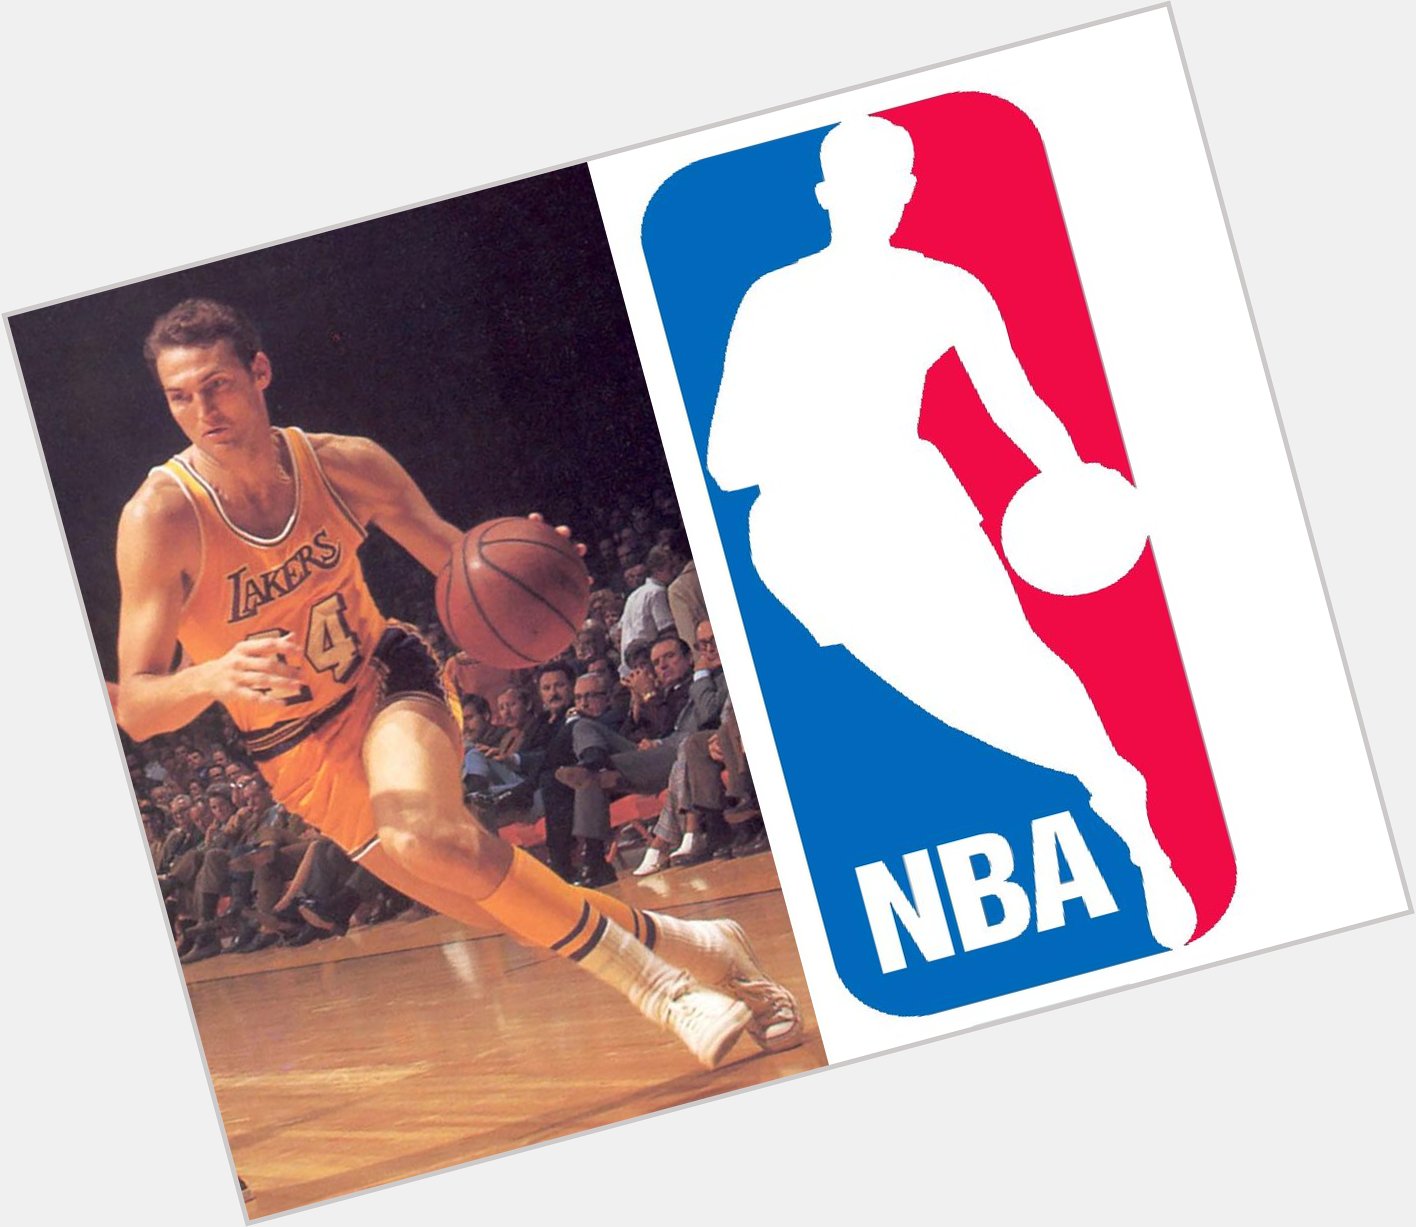 Happy Birthday Jerry West!!! The man who\s silhouette appears on the NBA logo turns 81 today.  